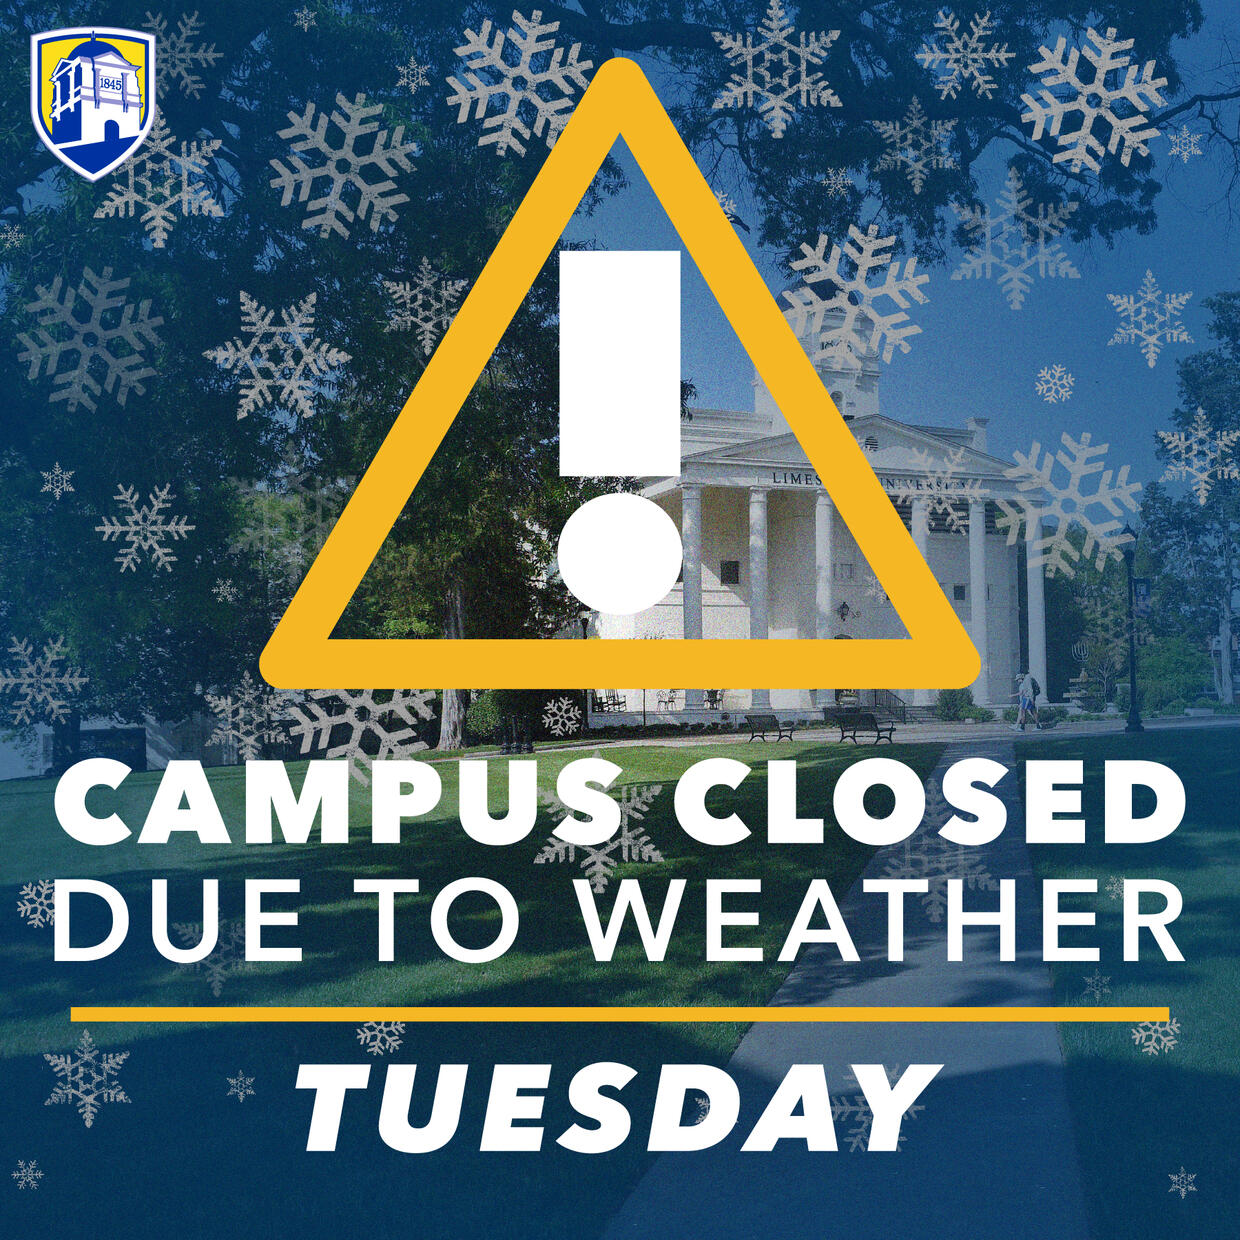 Campus Closed Tuesday